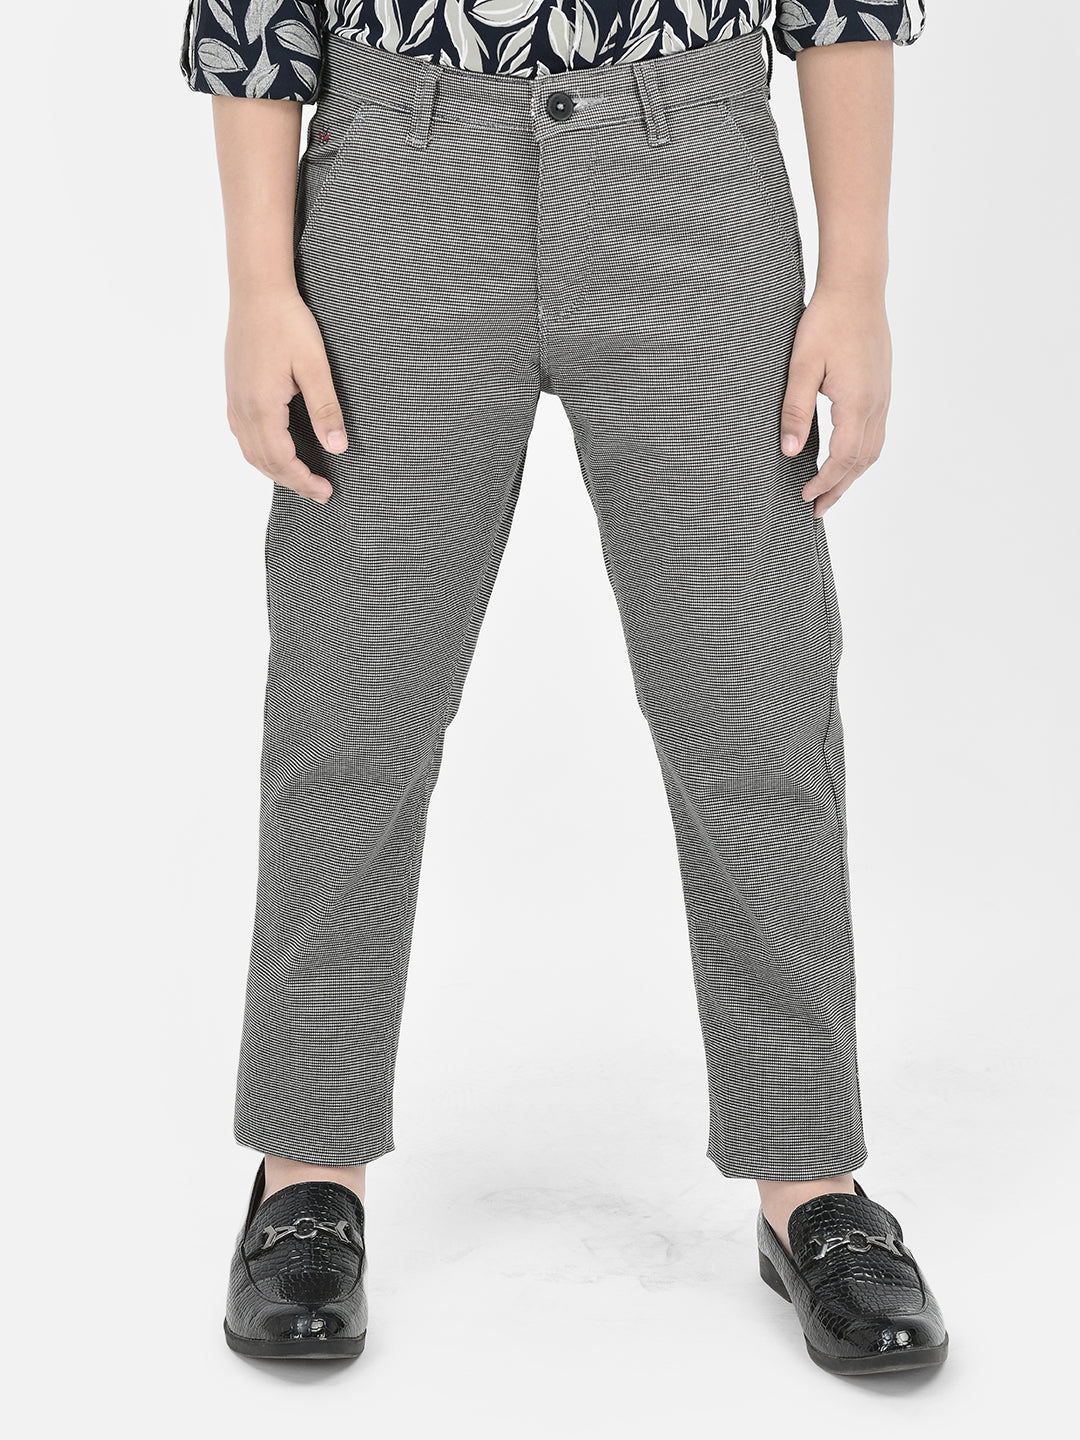  Grey Cotton Trousers